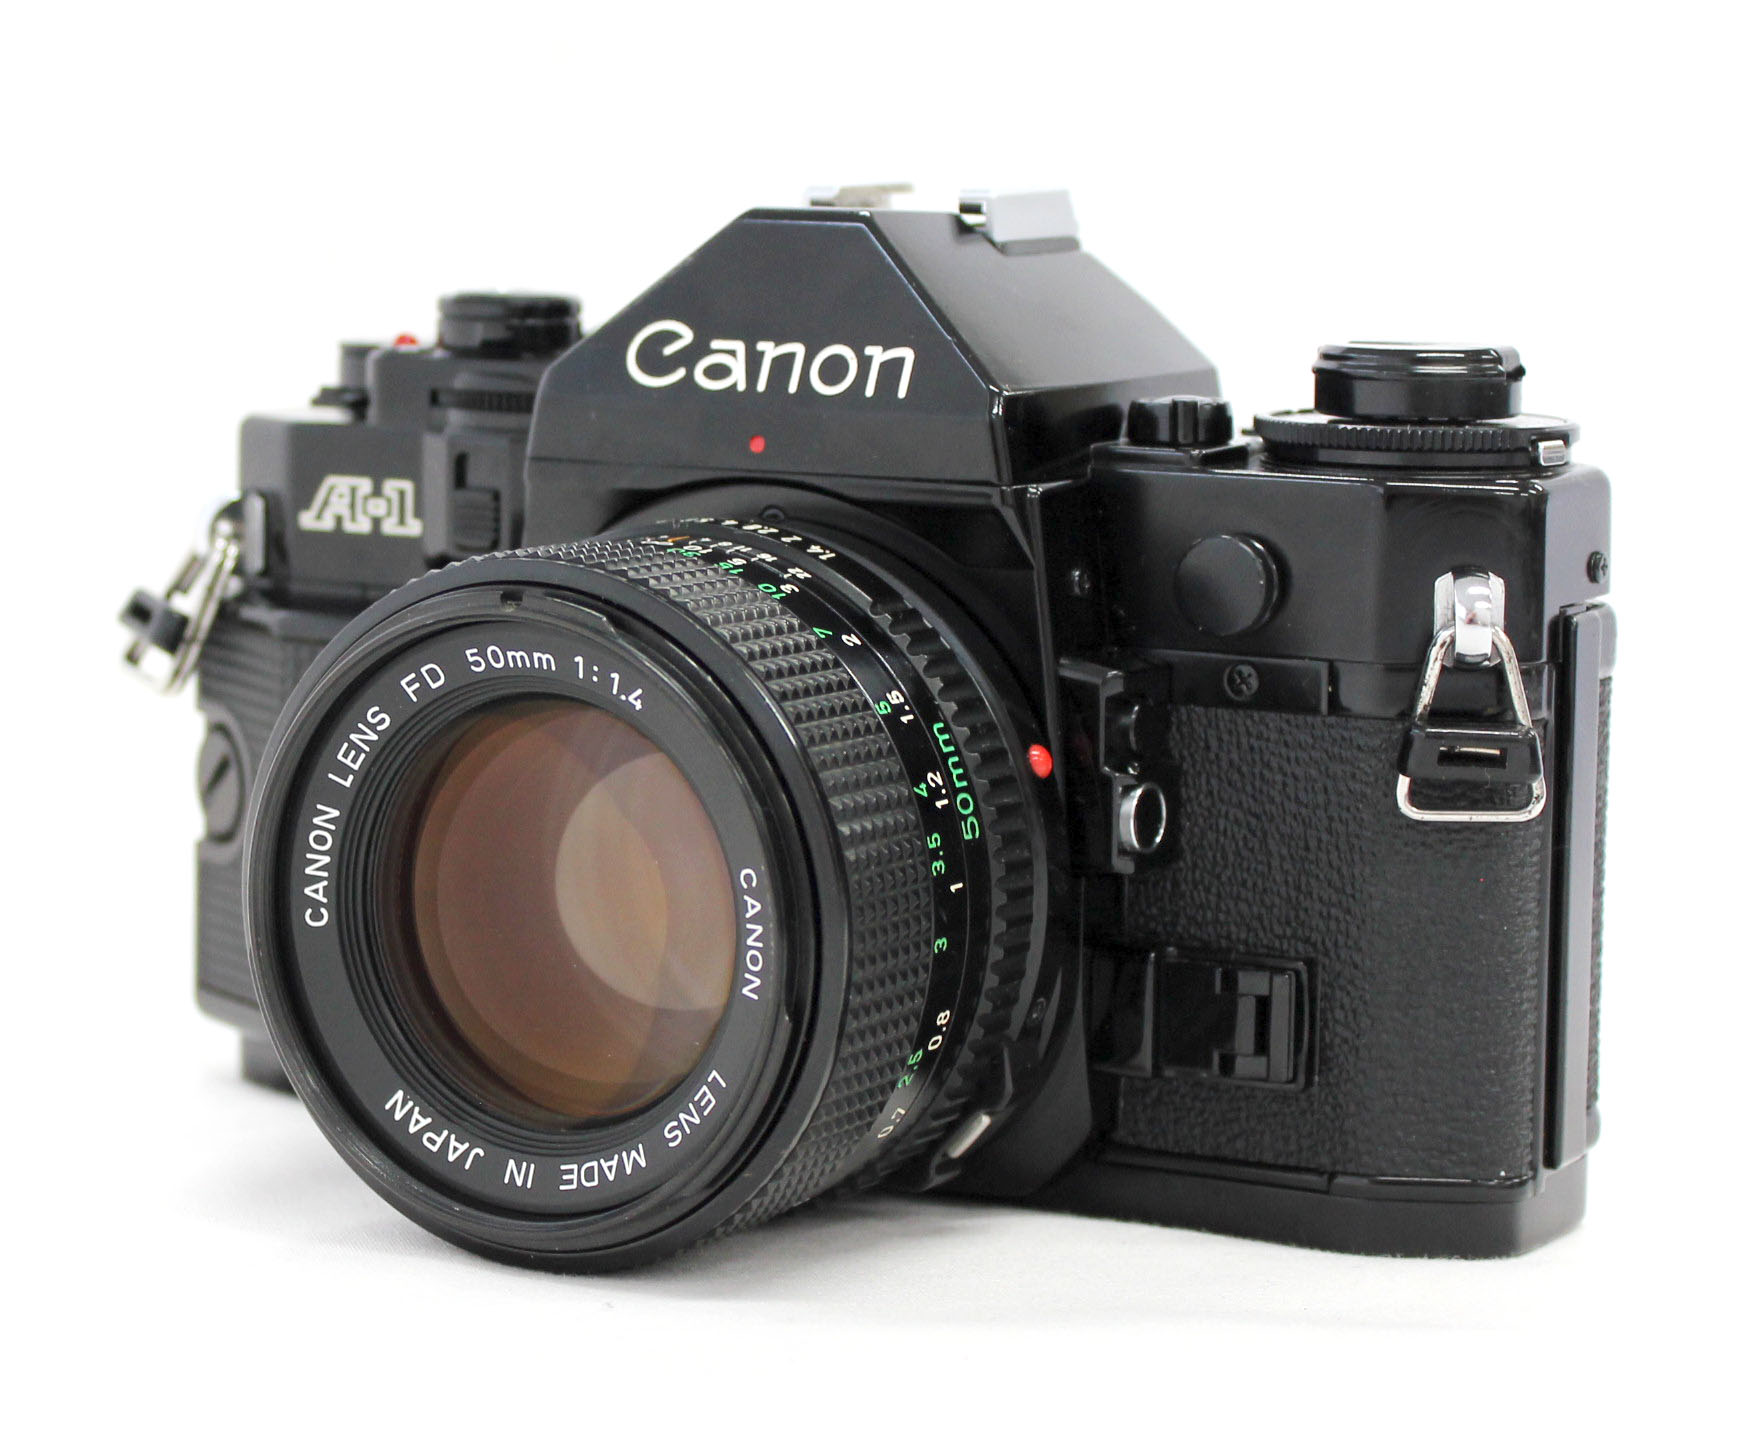  Canon A-1 35mm SLR Film Camera + New FD NFD 50mm F/1.4 Lens from Japan Photo 0